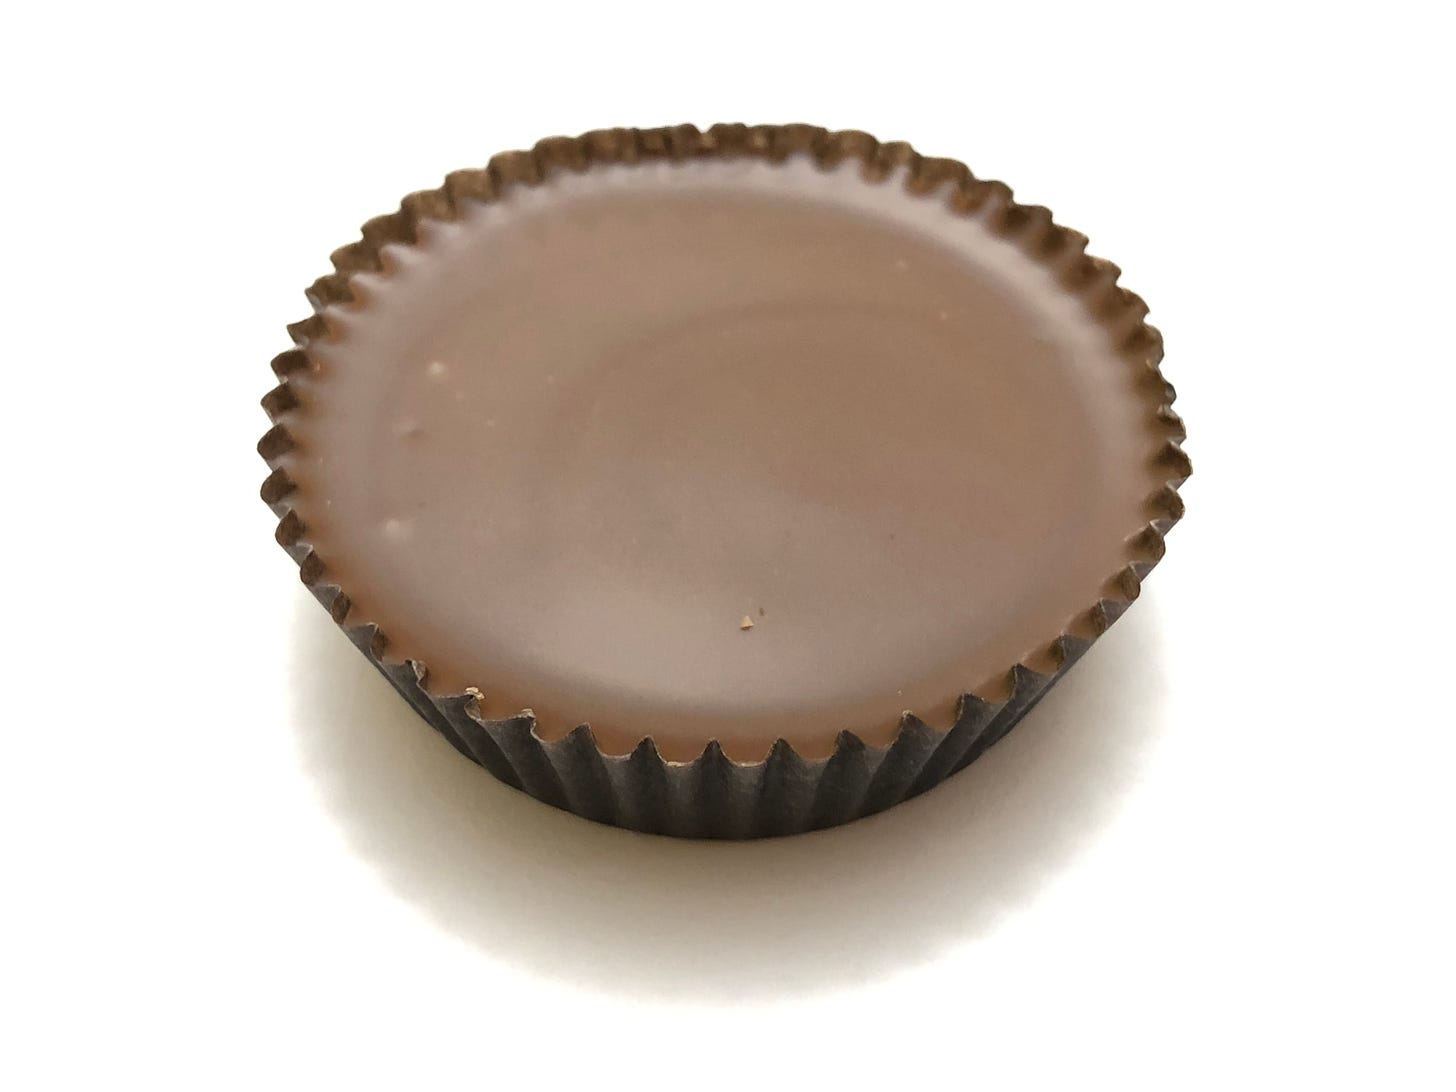 File:2021-05-15 14 49 09 A Reese&#39;s Peanut Butter Cup with the inner paper  cup intact in the Franklin Farm section of Oak Hill, Fairfax County,  Virginia.jpg - Wikimedia Commons